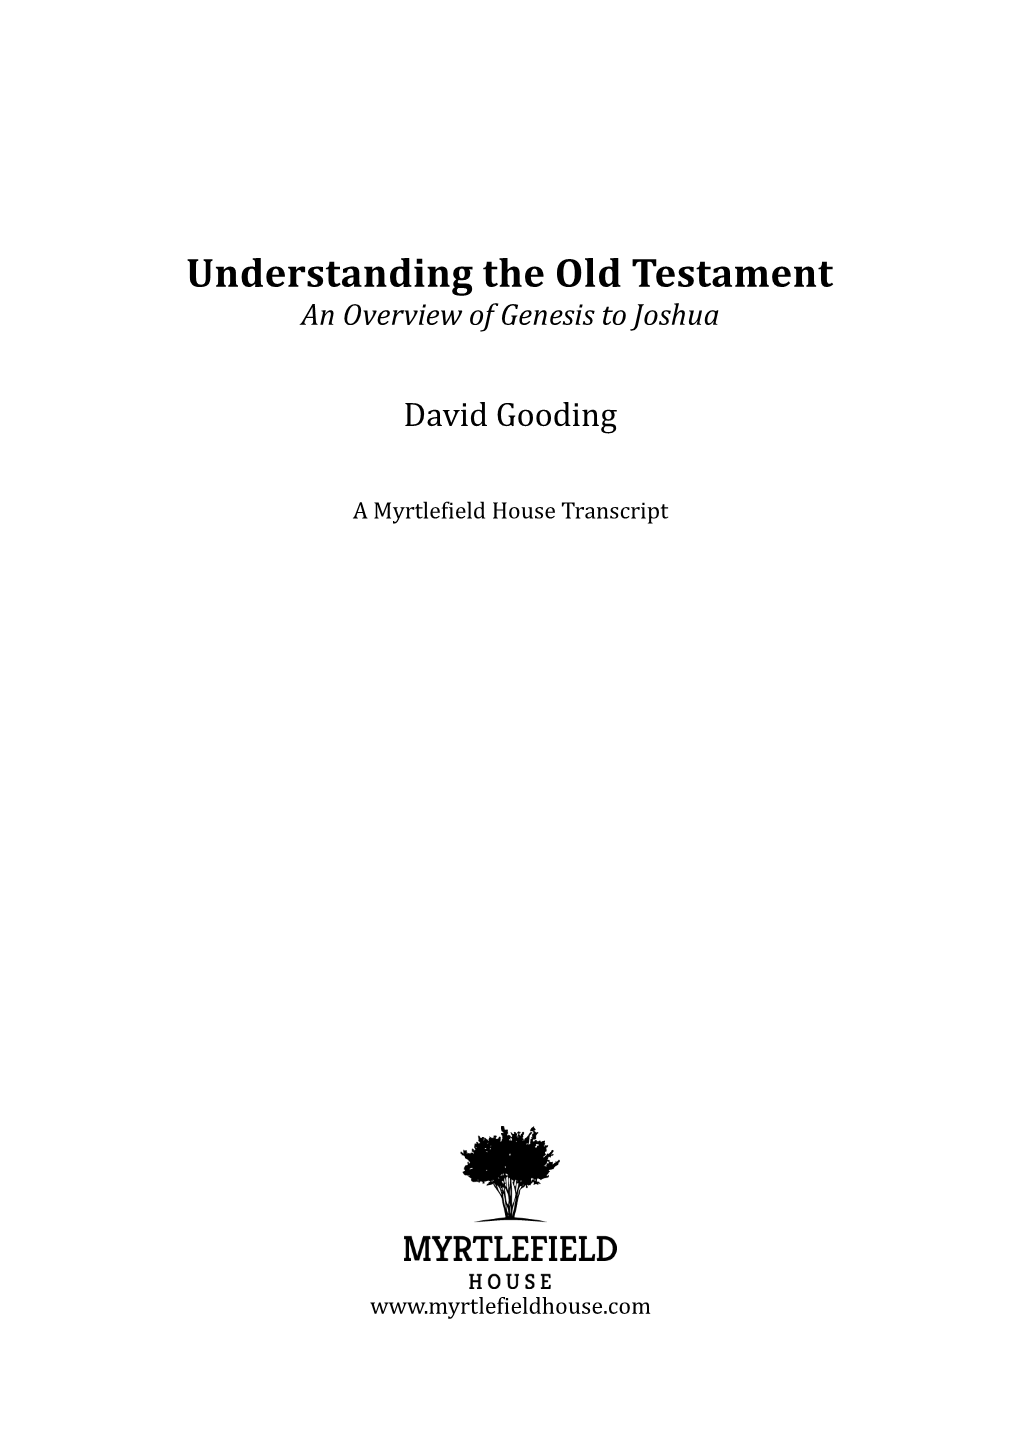 Understanding the Old Testament an Overview of Genesis to Joshua